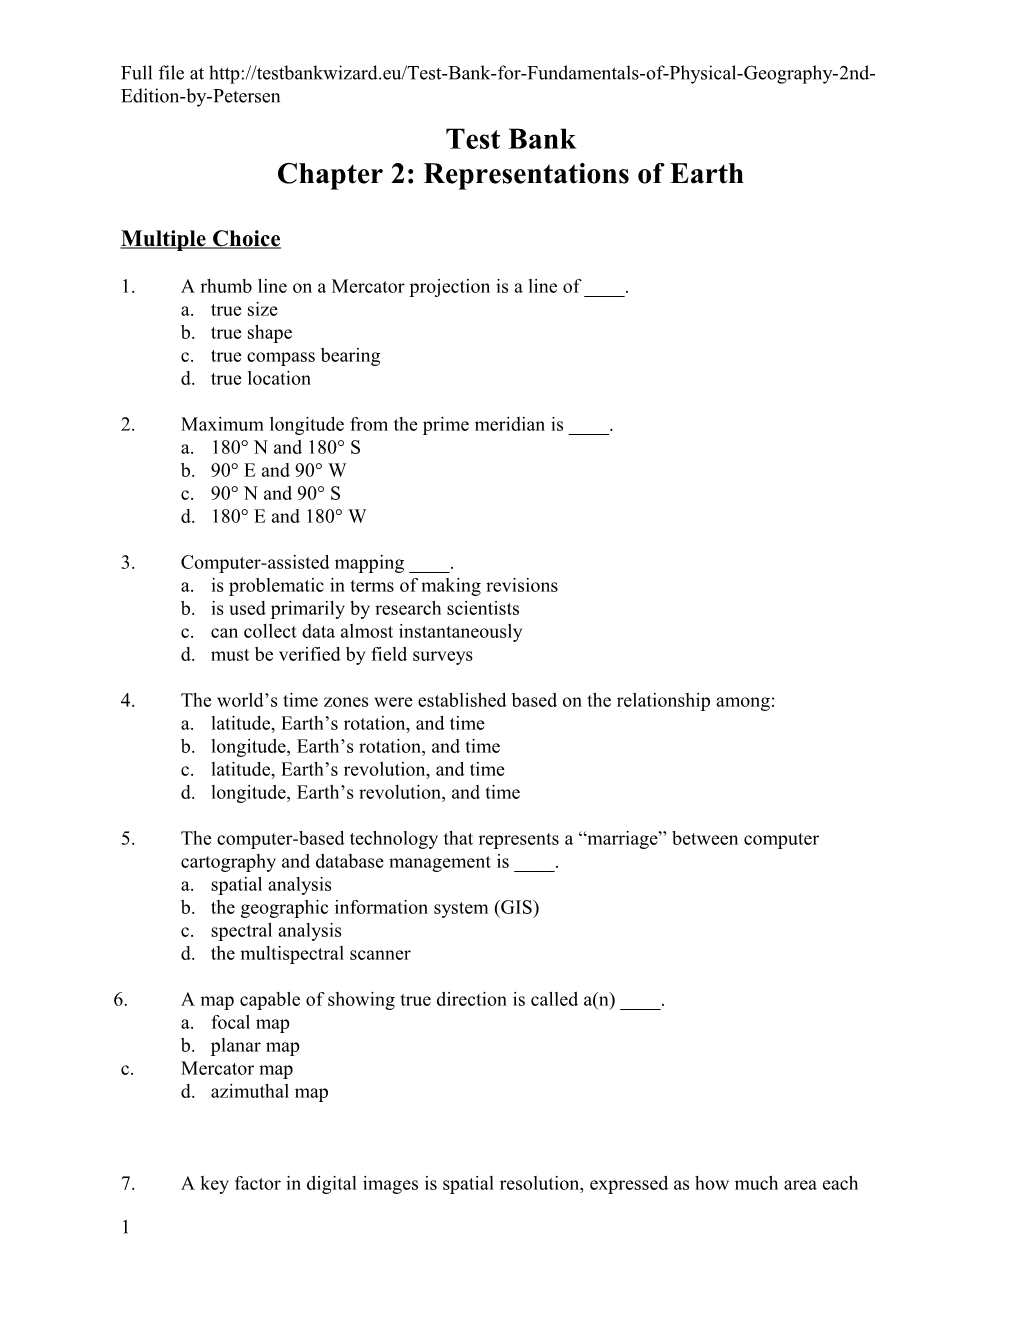 Chapter 2: Representations of Earth